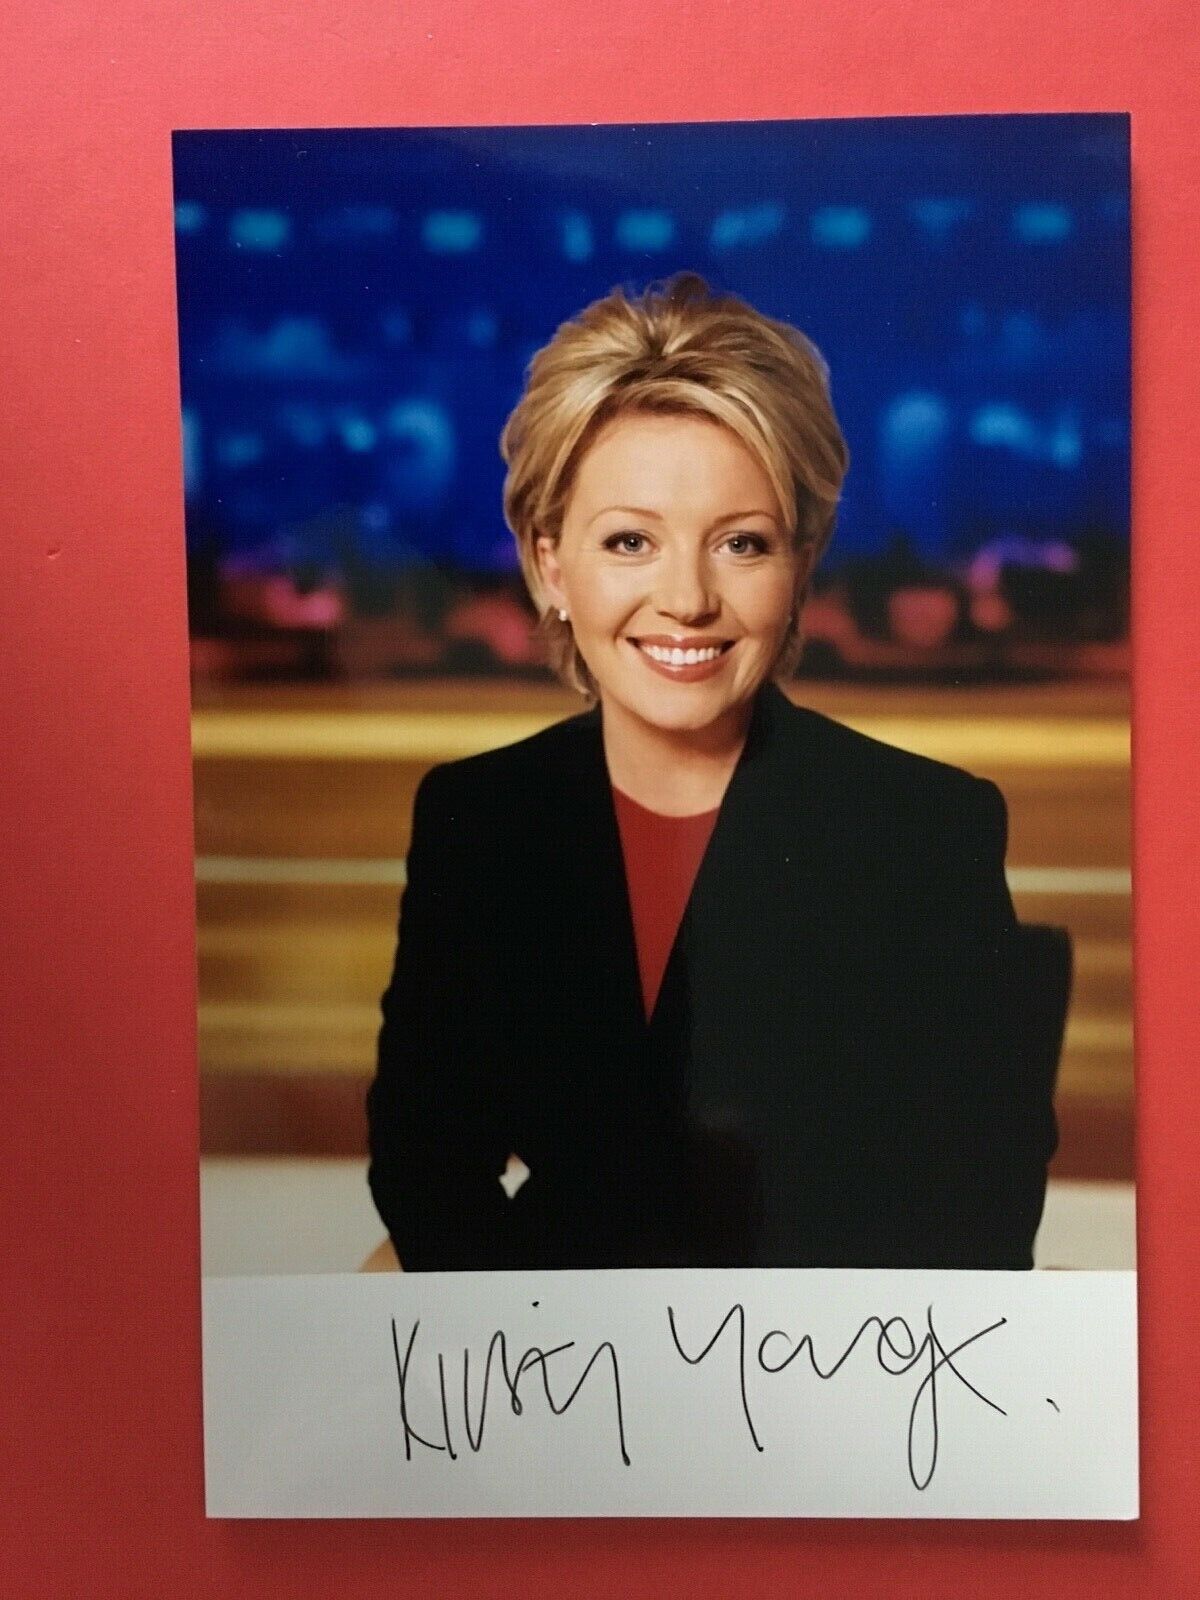 KIRSTY YOUNG - ATTRACTIVE NEWS PRESENTER - EXCELLENT SIGNED Photo Poster paintingGRAPH